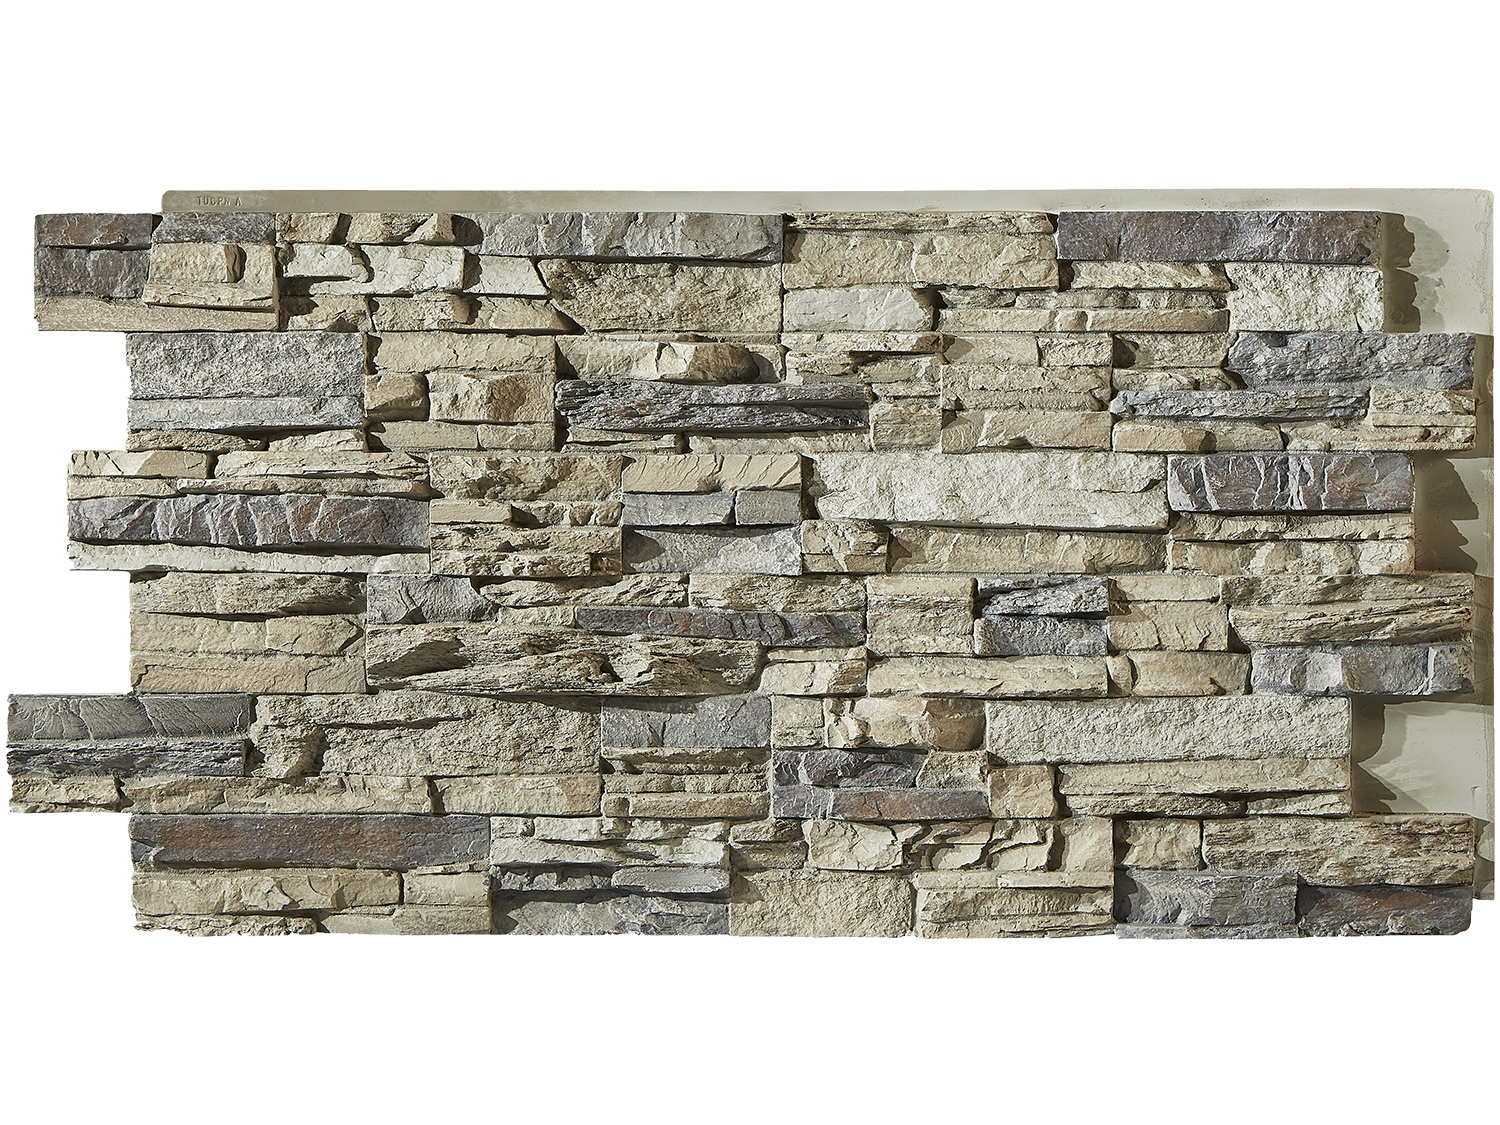 Is the Colorado dry stack a plastic looking panel or does it have texture and dimensions of a true stack stone?